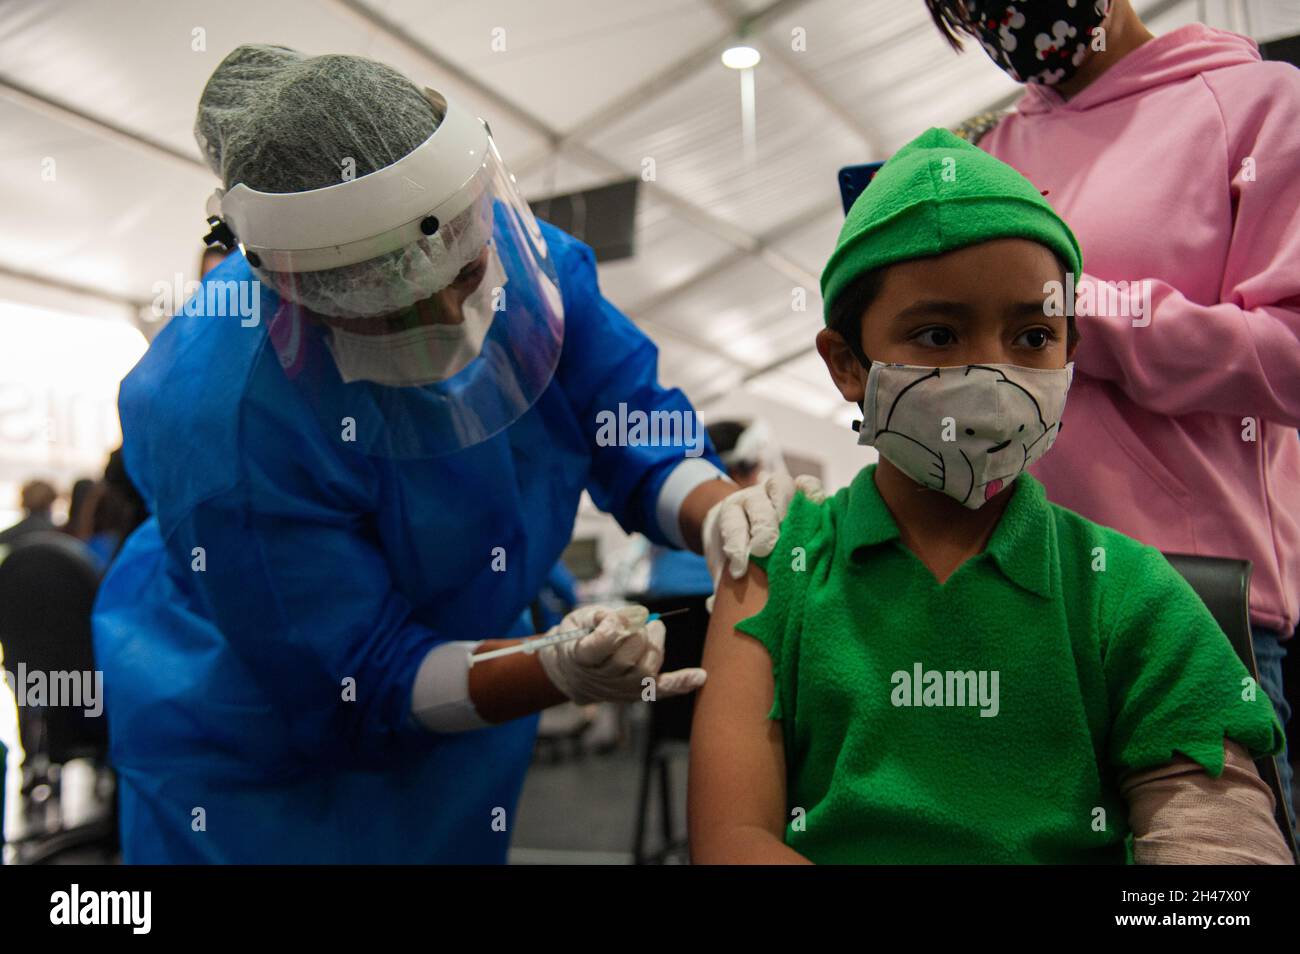 A child using a Peter Pan Costume during halloween gets his first dose of the COVID-19 vaccine as the Colombian government begins to vaccinate childre Stock Photo